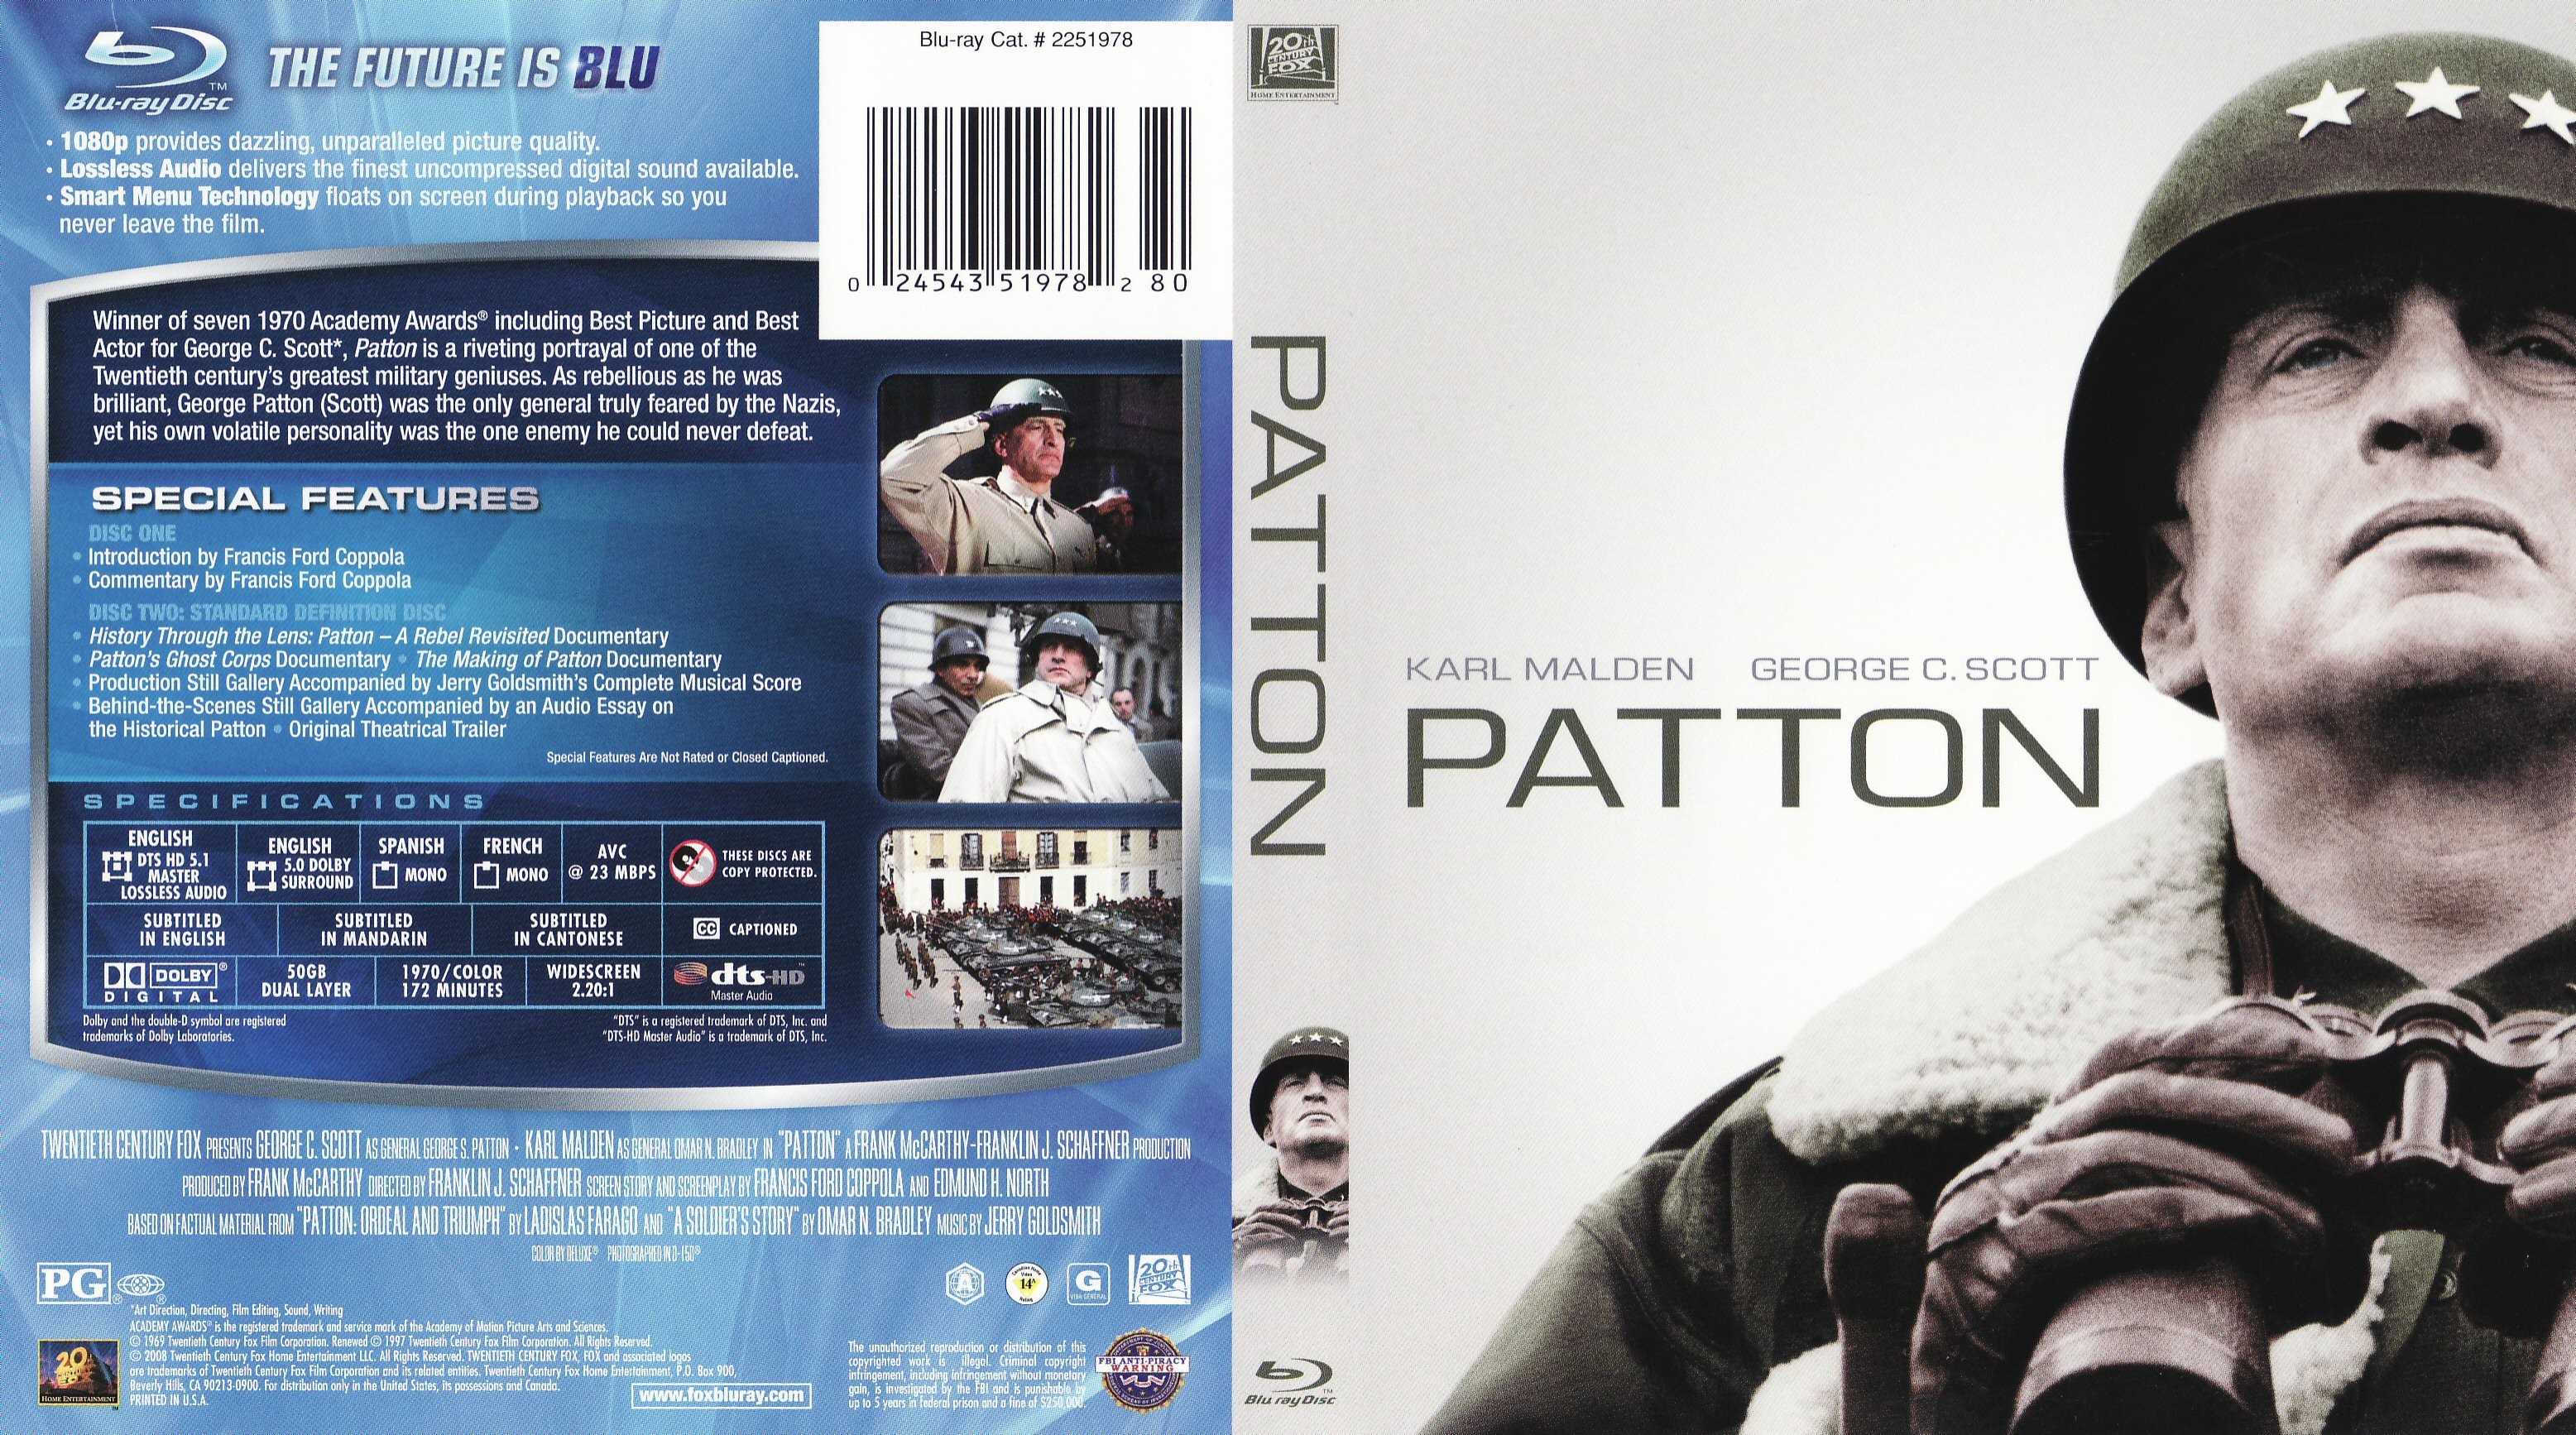 Jaquette DVD Patton (Canadienne) (BLU-RAY)